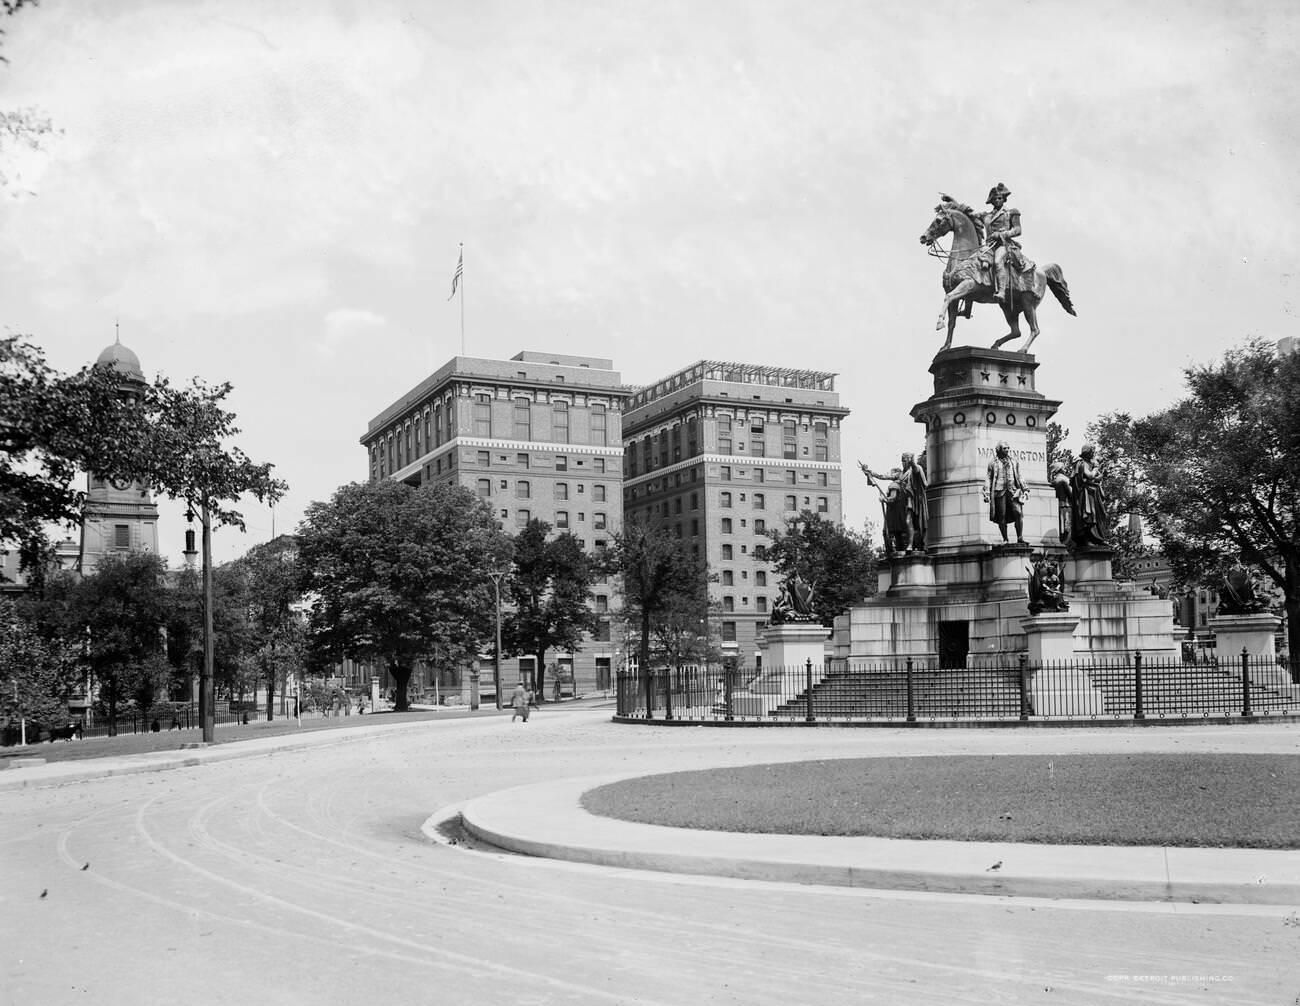 Hotel Richmond from the Capitol, Richmond, 1920s